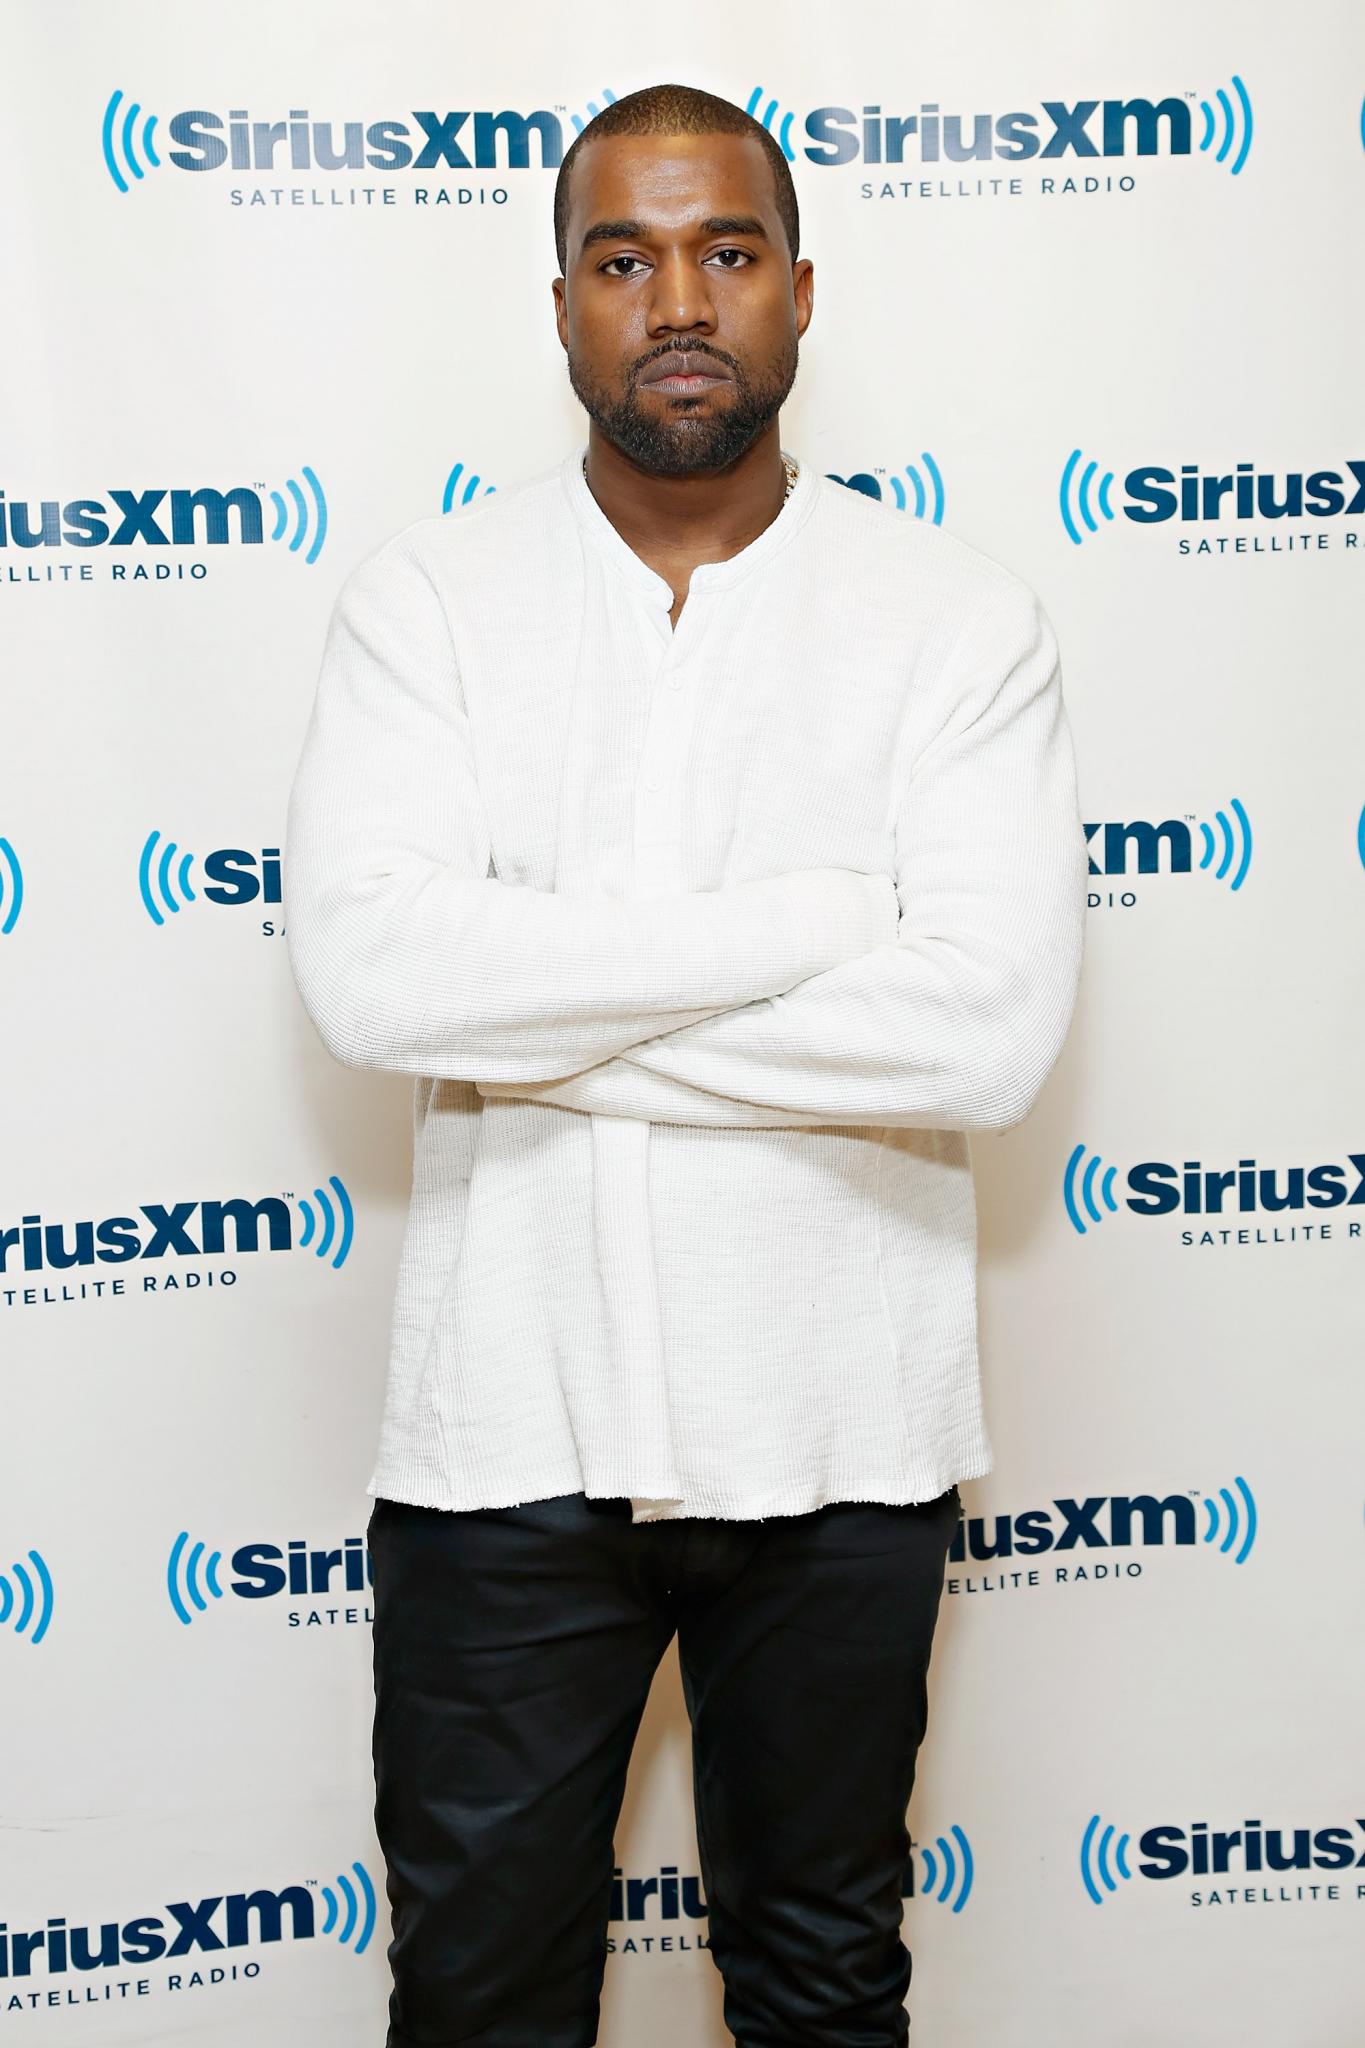 District Attorney Declines to Prosecute Kanye West in Brawl
